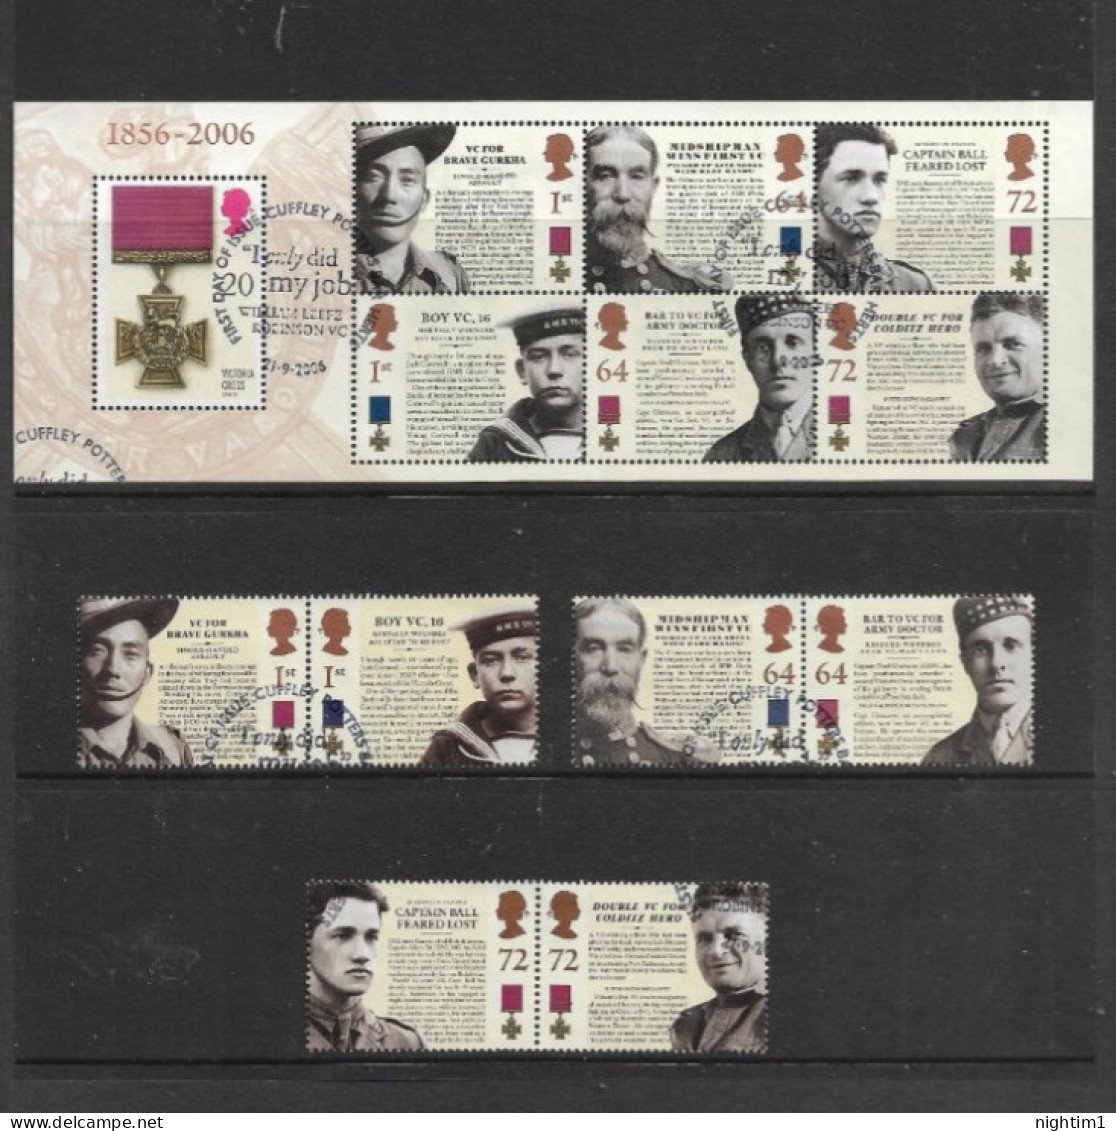 GREAT BRITAIN COLLECTION. VICTORIA CROSS SET OF 6 AND SOUVENIR SHEET. USED. - Gebruikt